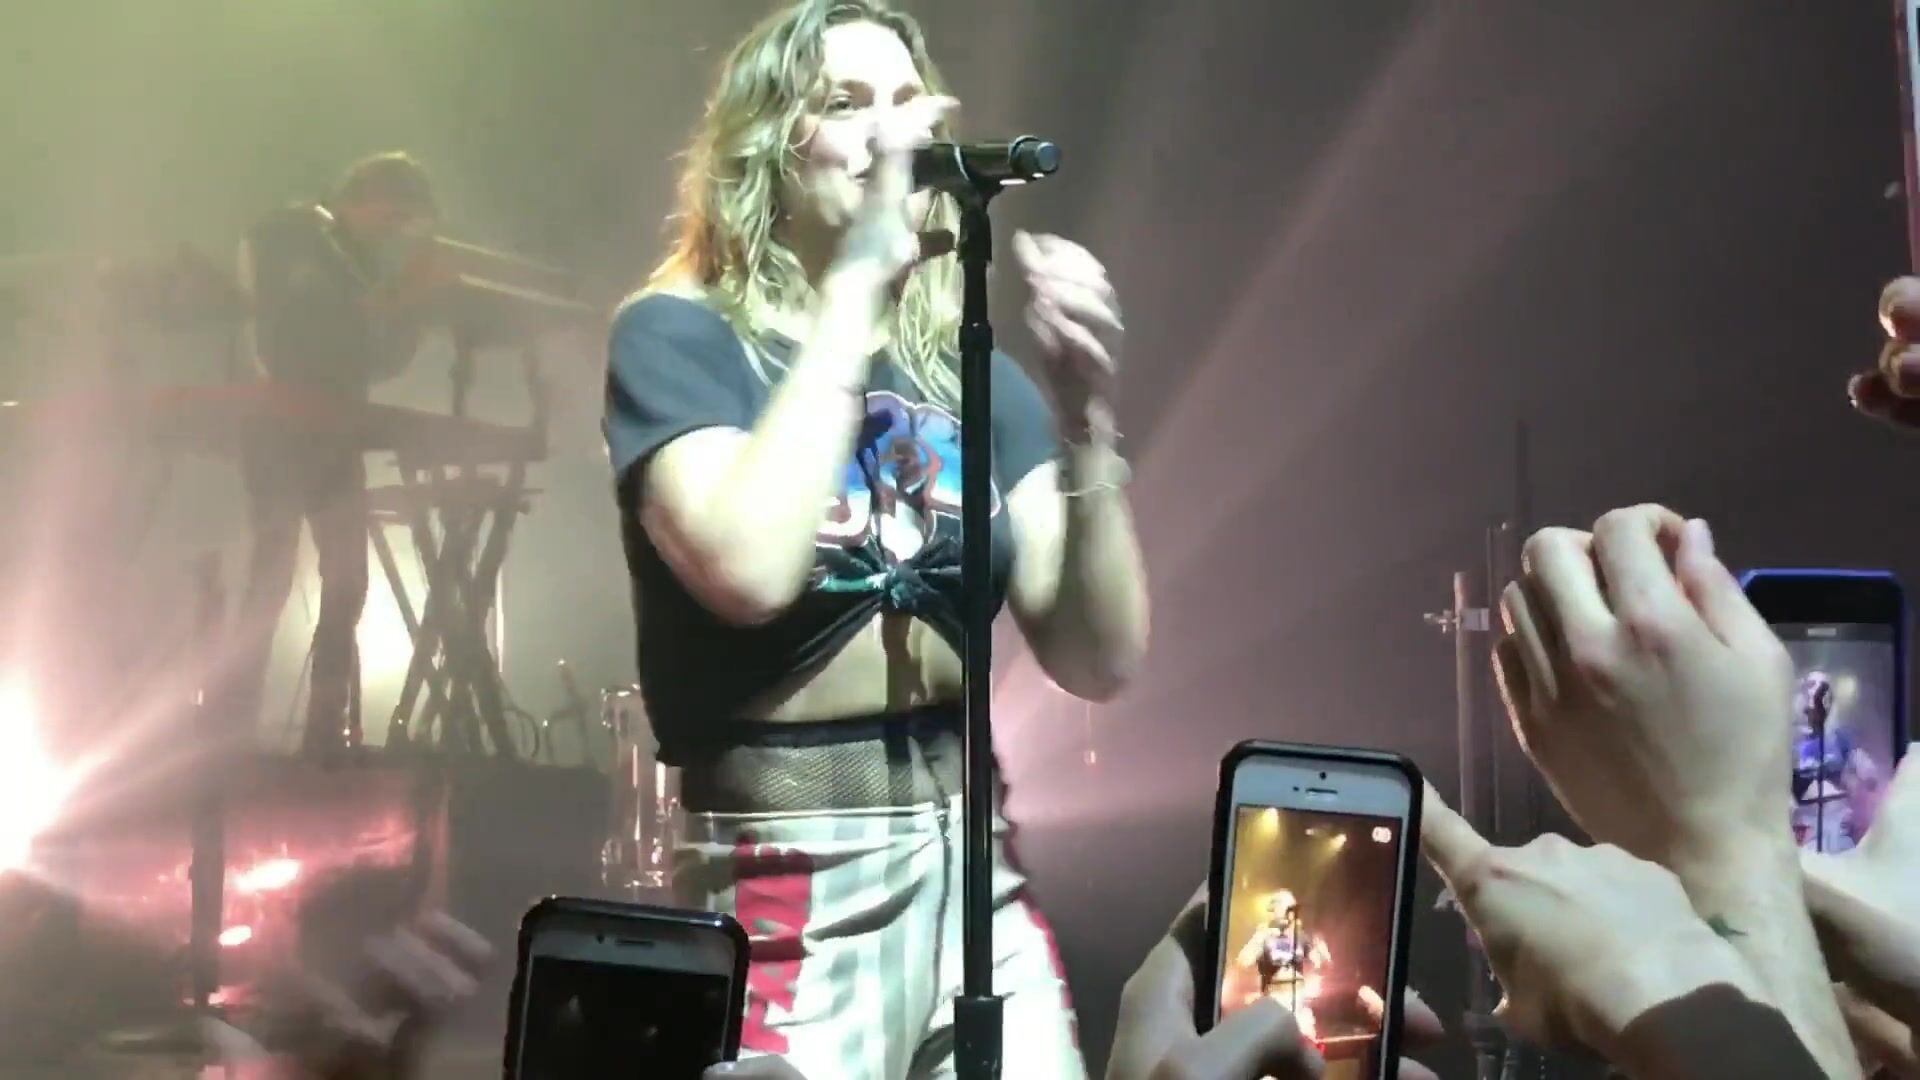 C.urvy Concert moments full of shame and excitement when Tove Lo nude exposes boobies on stage GayMaleTube